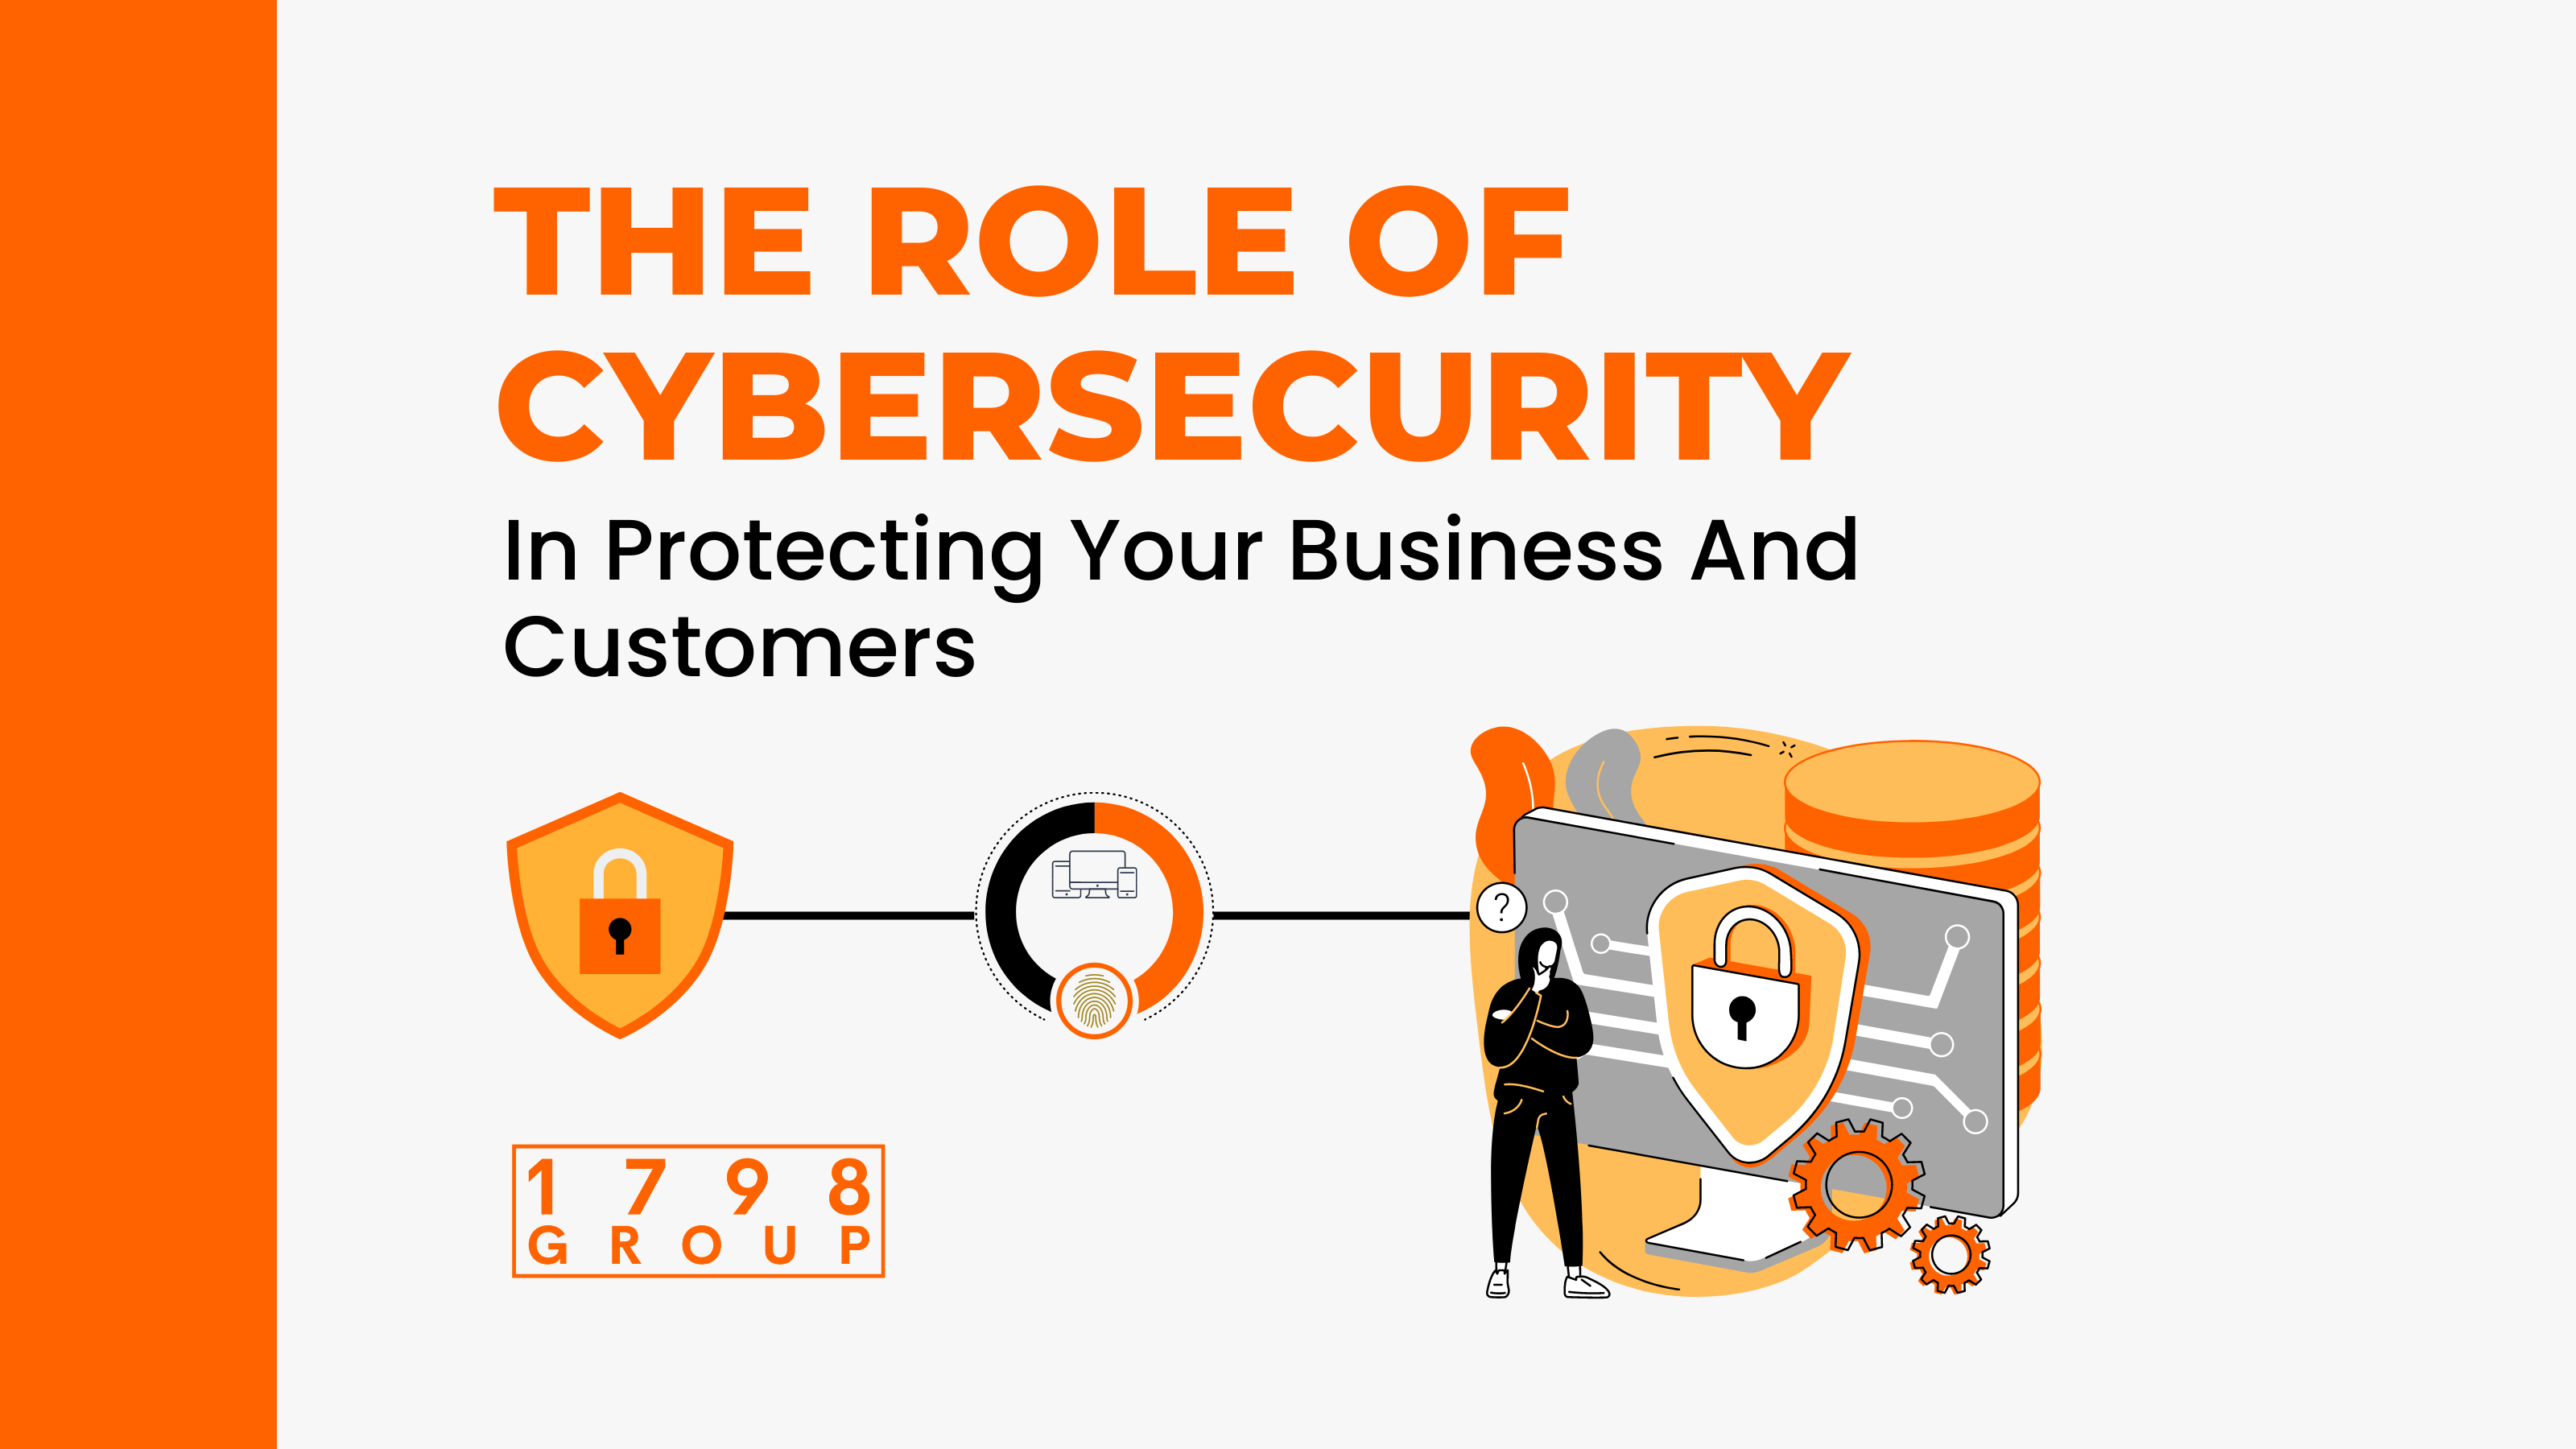 The Role of Cybersecurity in Protecting Your Business and Customers